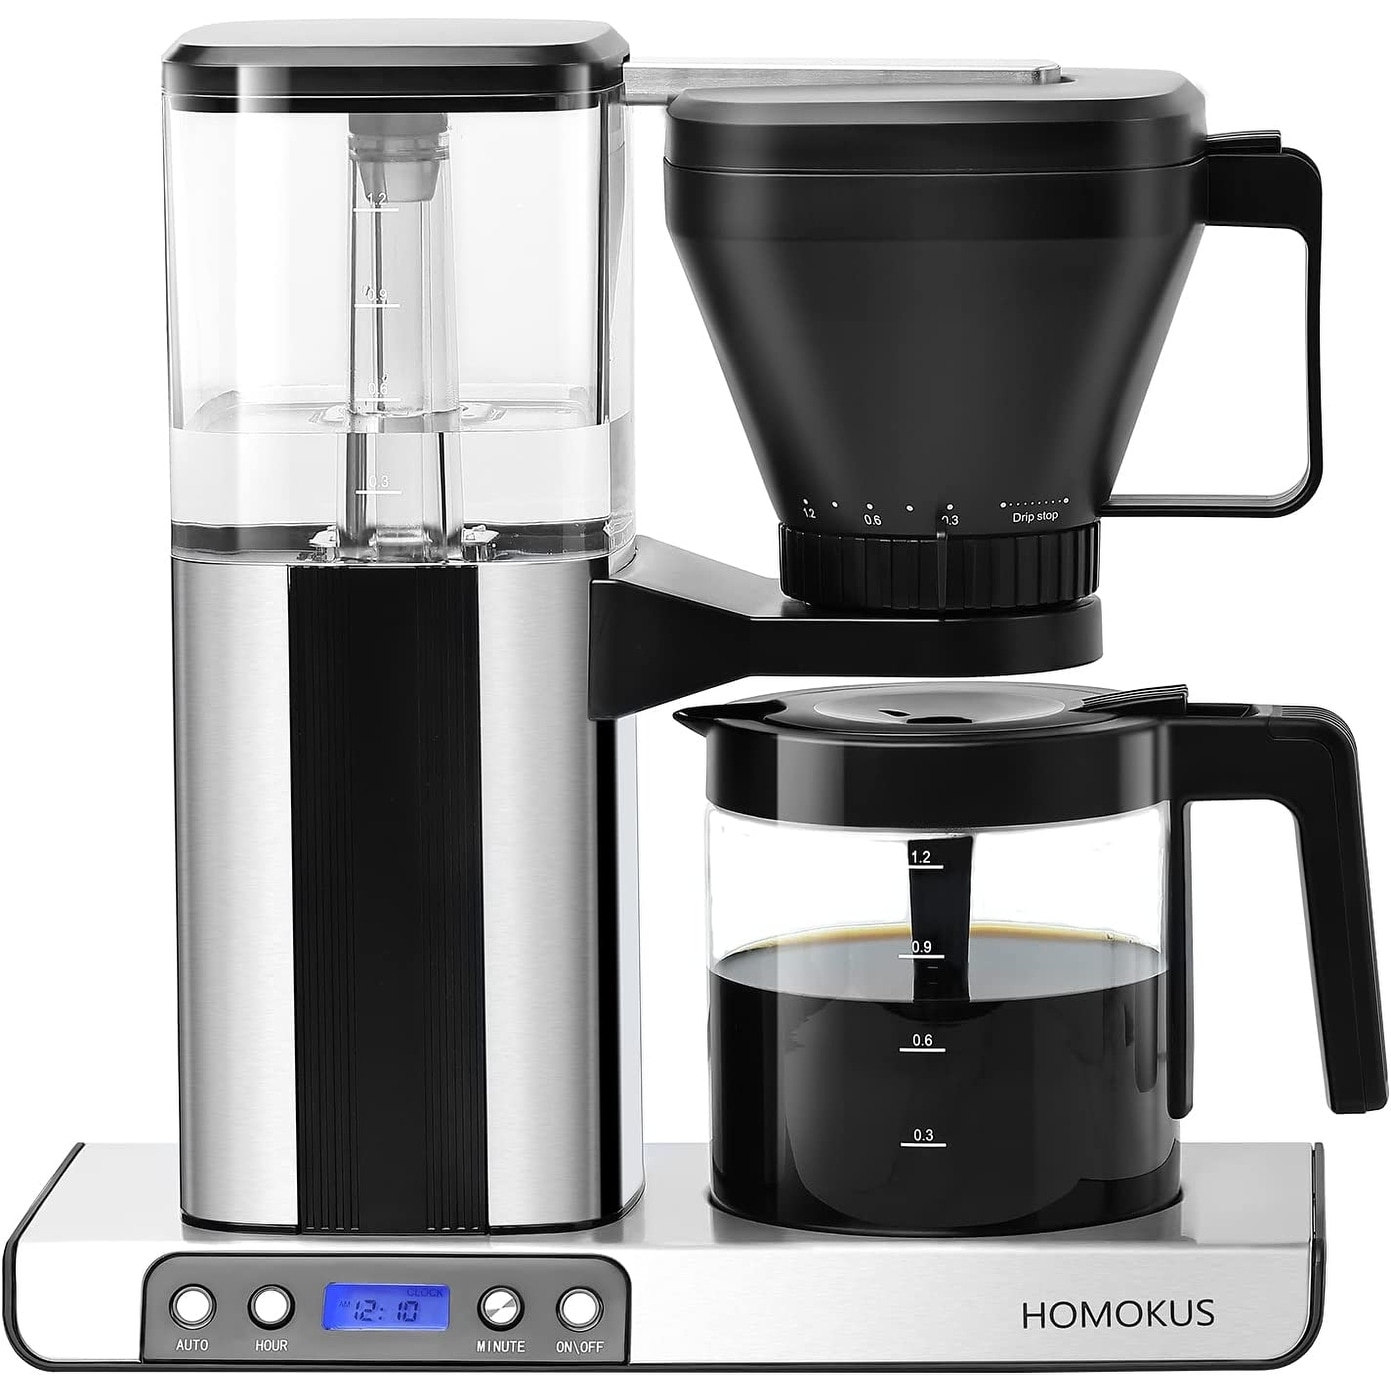 https://ak1.ostkcdn.com/images/products/is/images/direct/3bb5a51439b6ad2996b0e772e84cc71f0cc2b1fc/8-Cup-Drip-Coffee-Maker---Stainless-Steel-Coffee-Maker---Programmable-Coffee-Maker-with-Timer.jpg